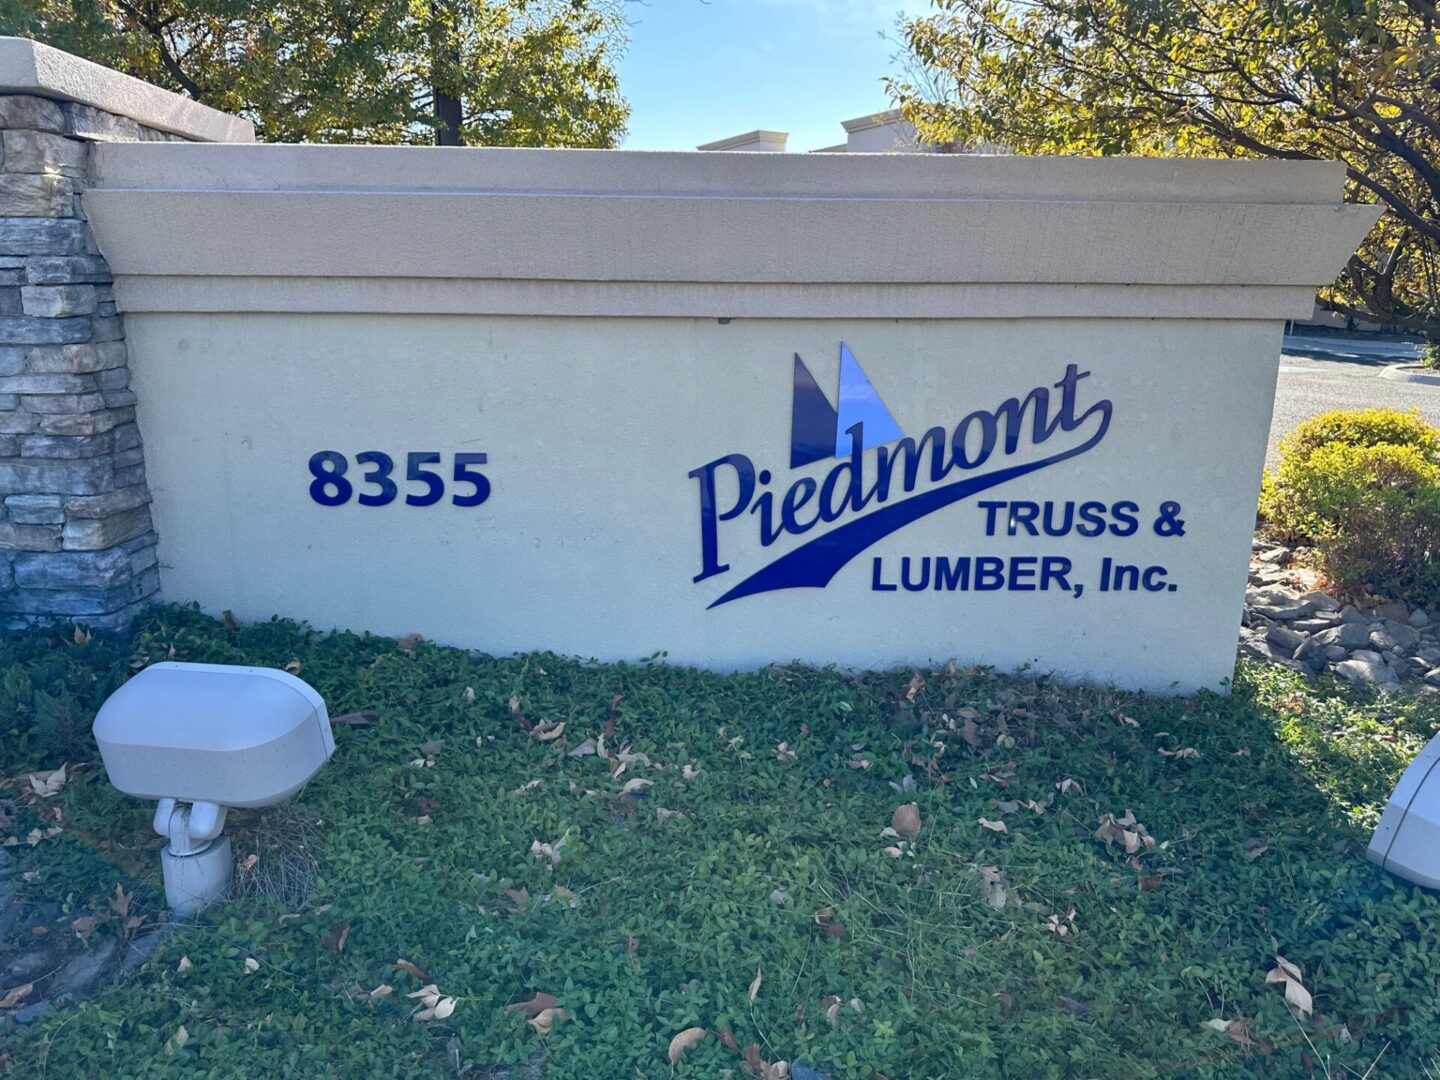 A sign for piedmont truss and lumber